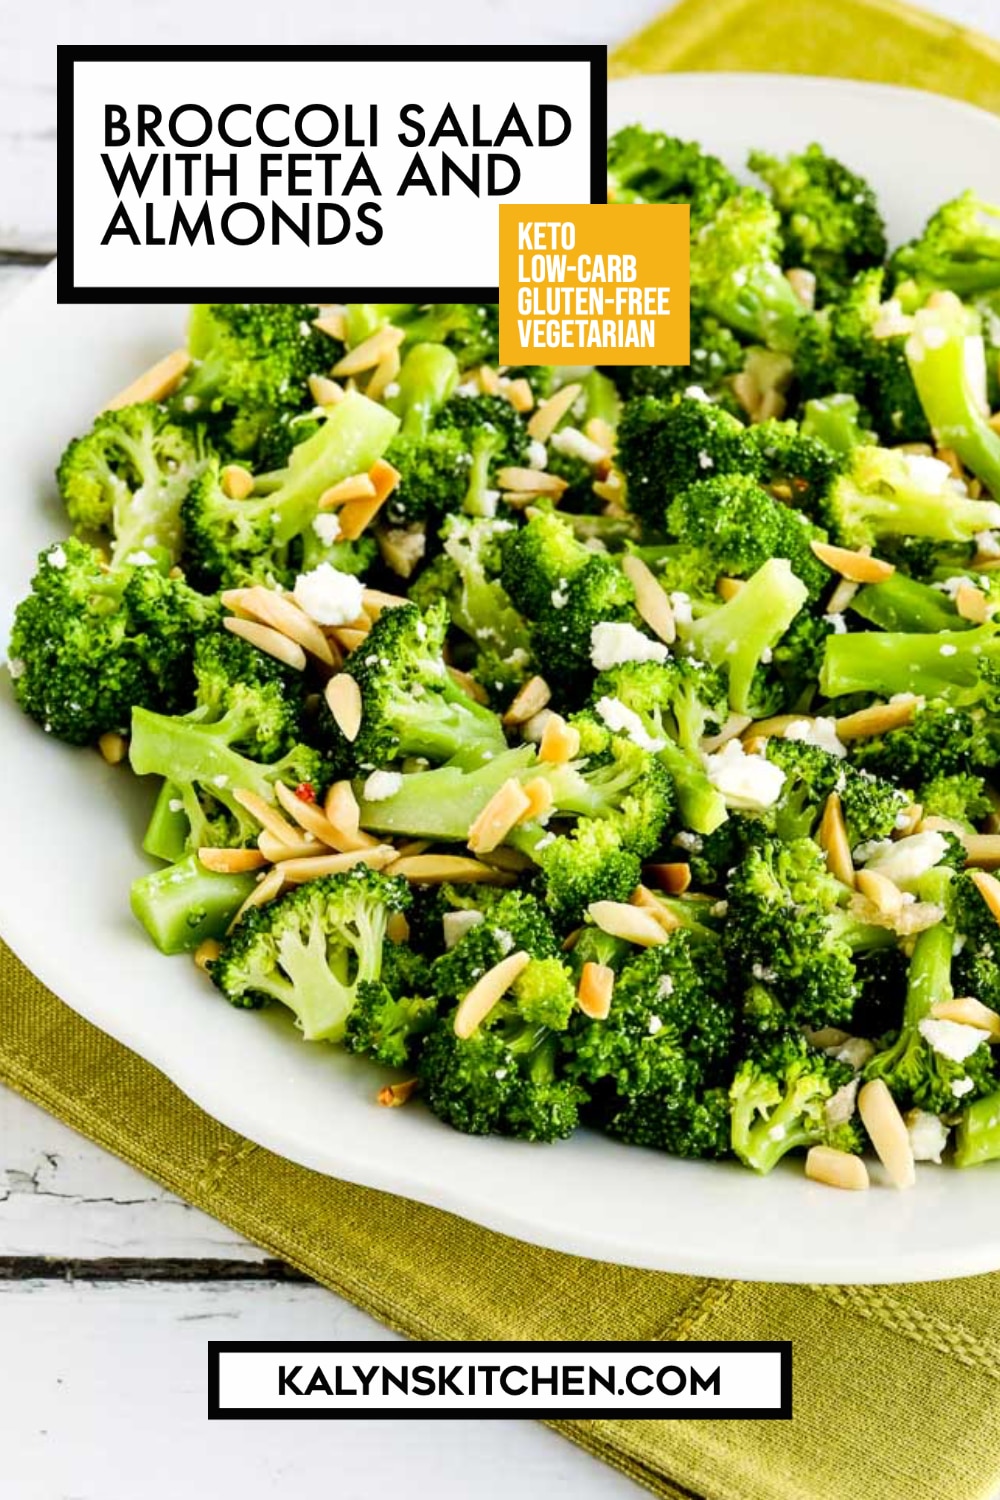 Pinterest image of Broccoli Salad with Feta and Almonds